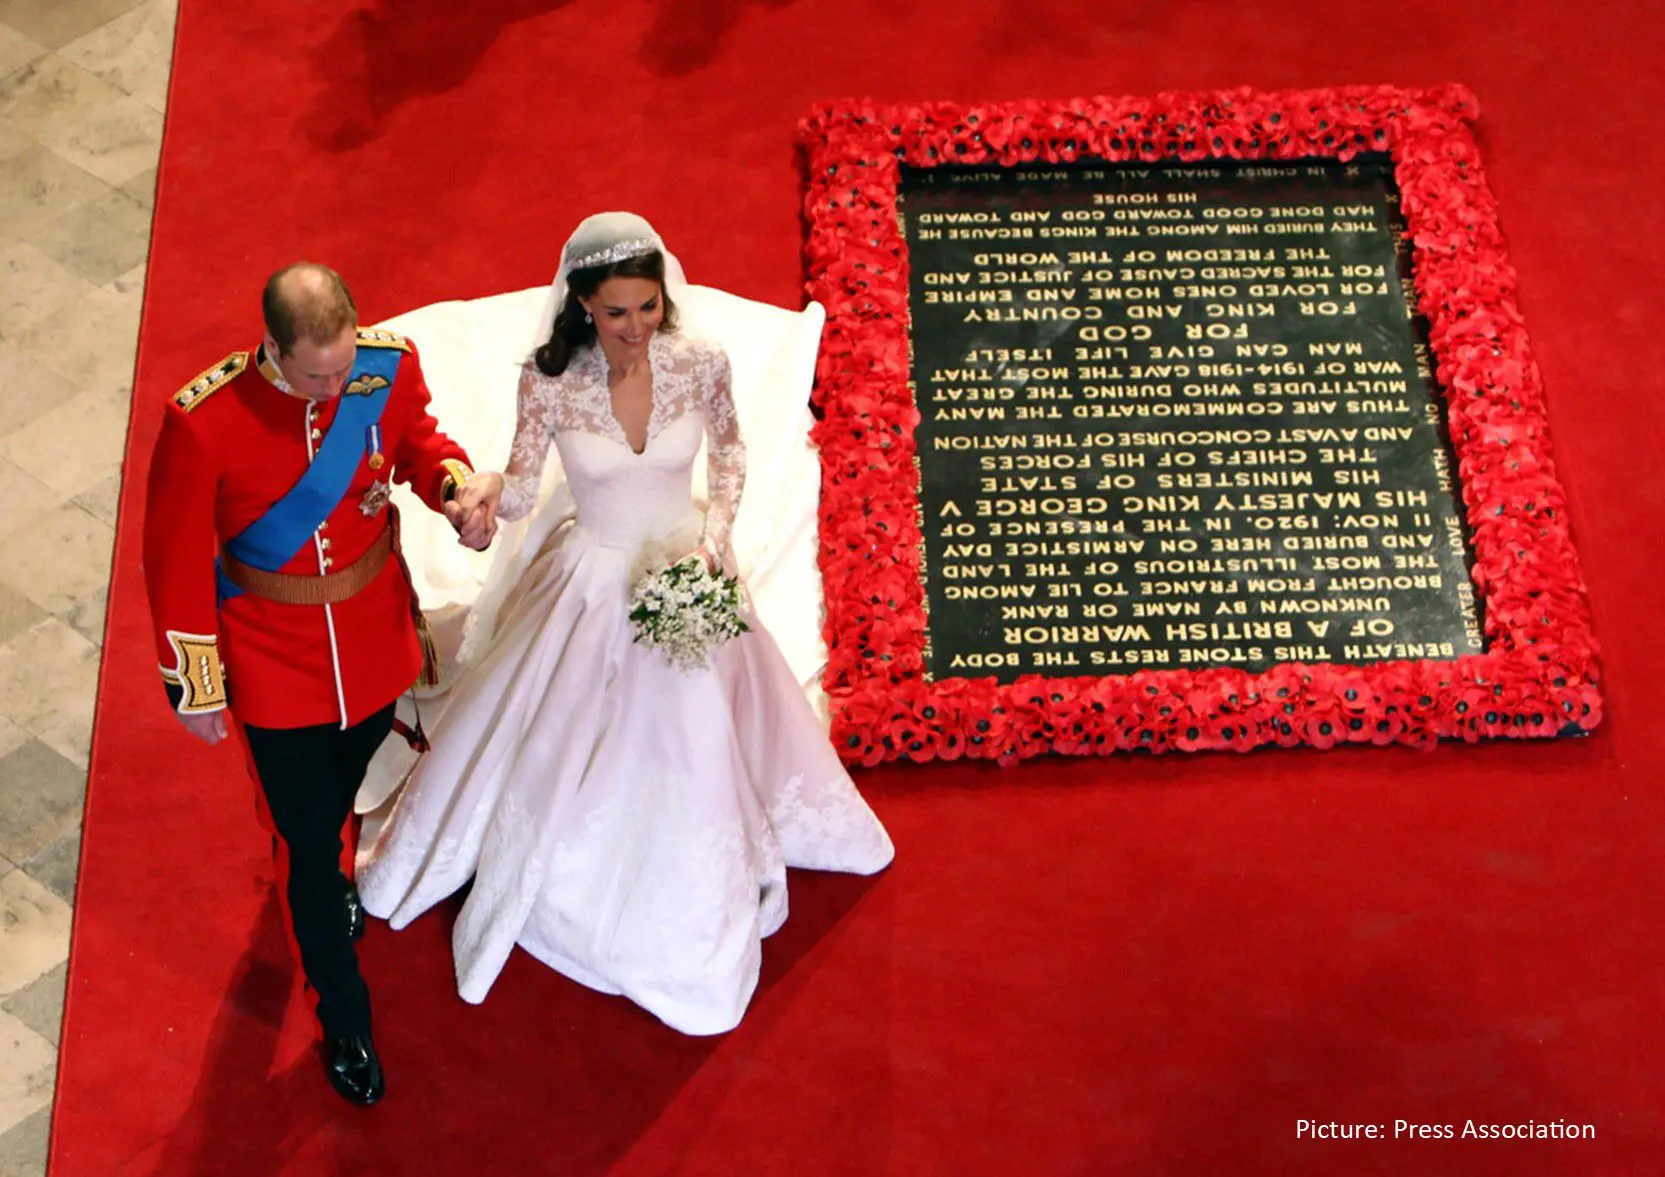 The 10th wedding anniversary of The Duke and Duchess of Cambridge is changing the winds of Royal Watching world